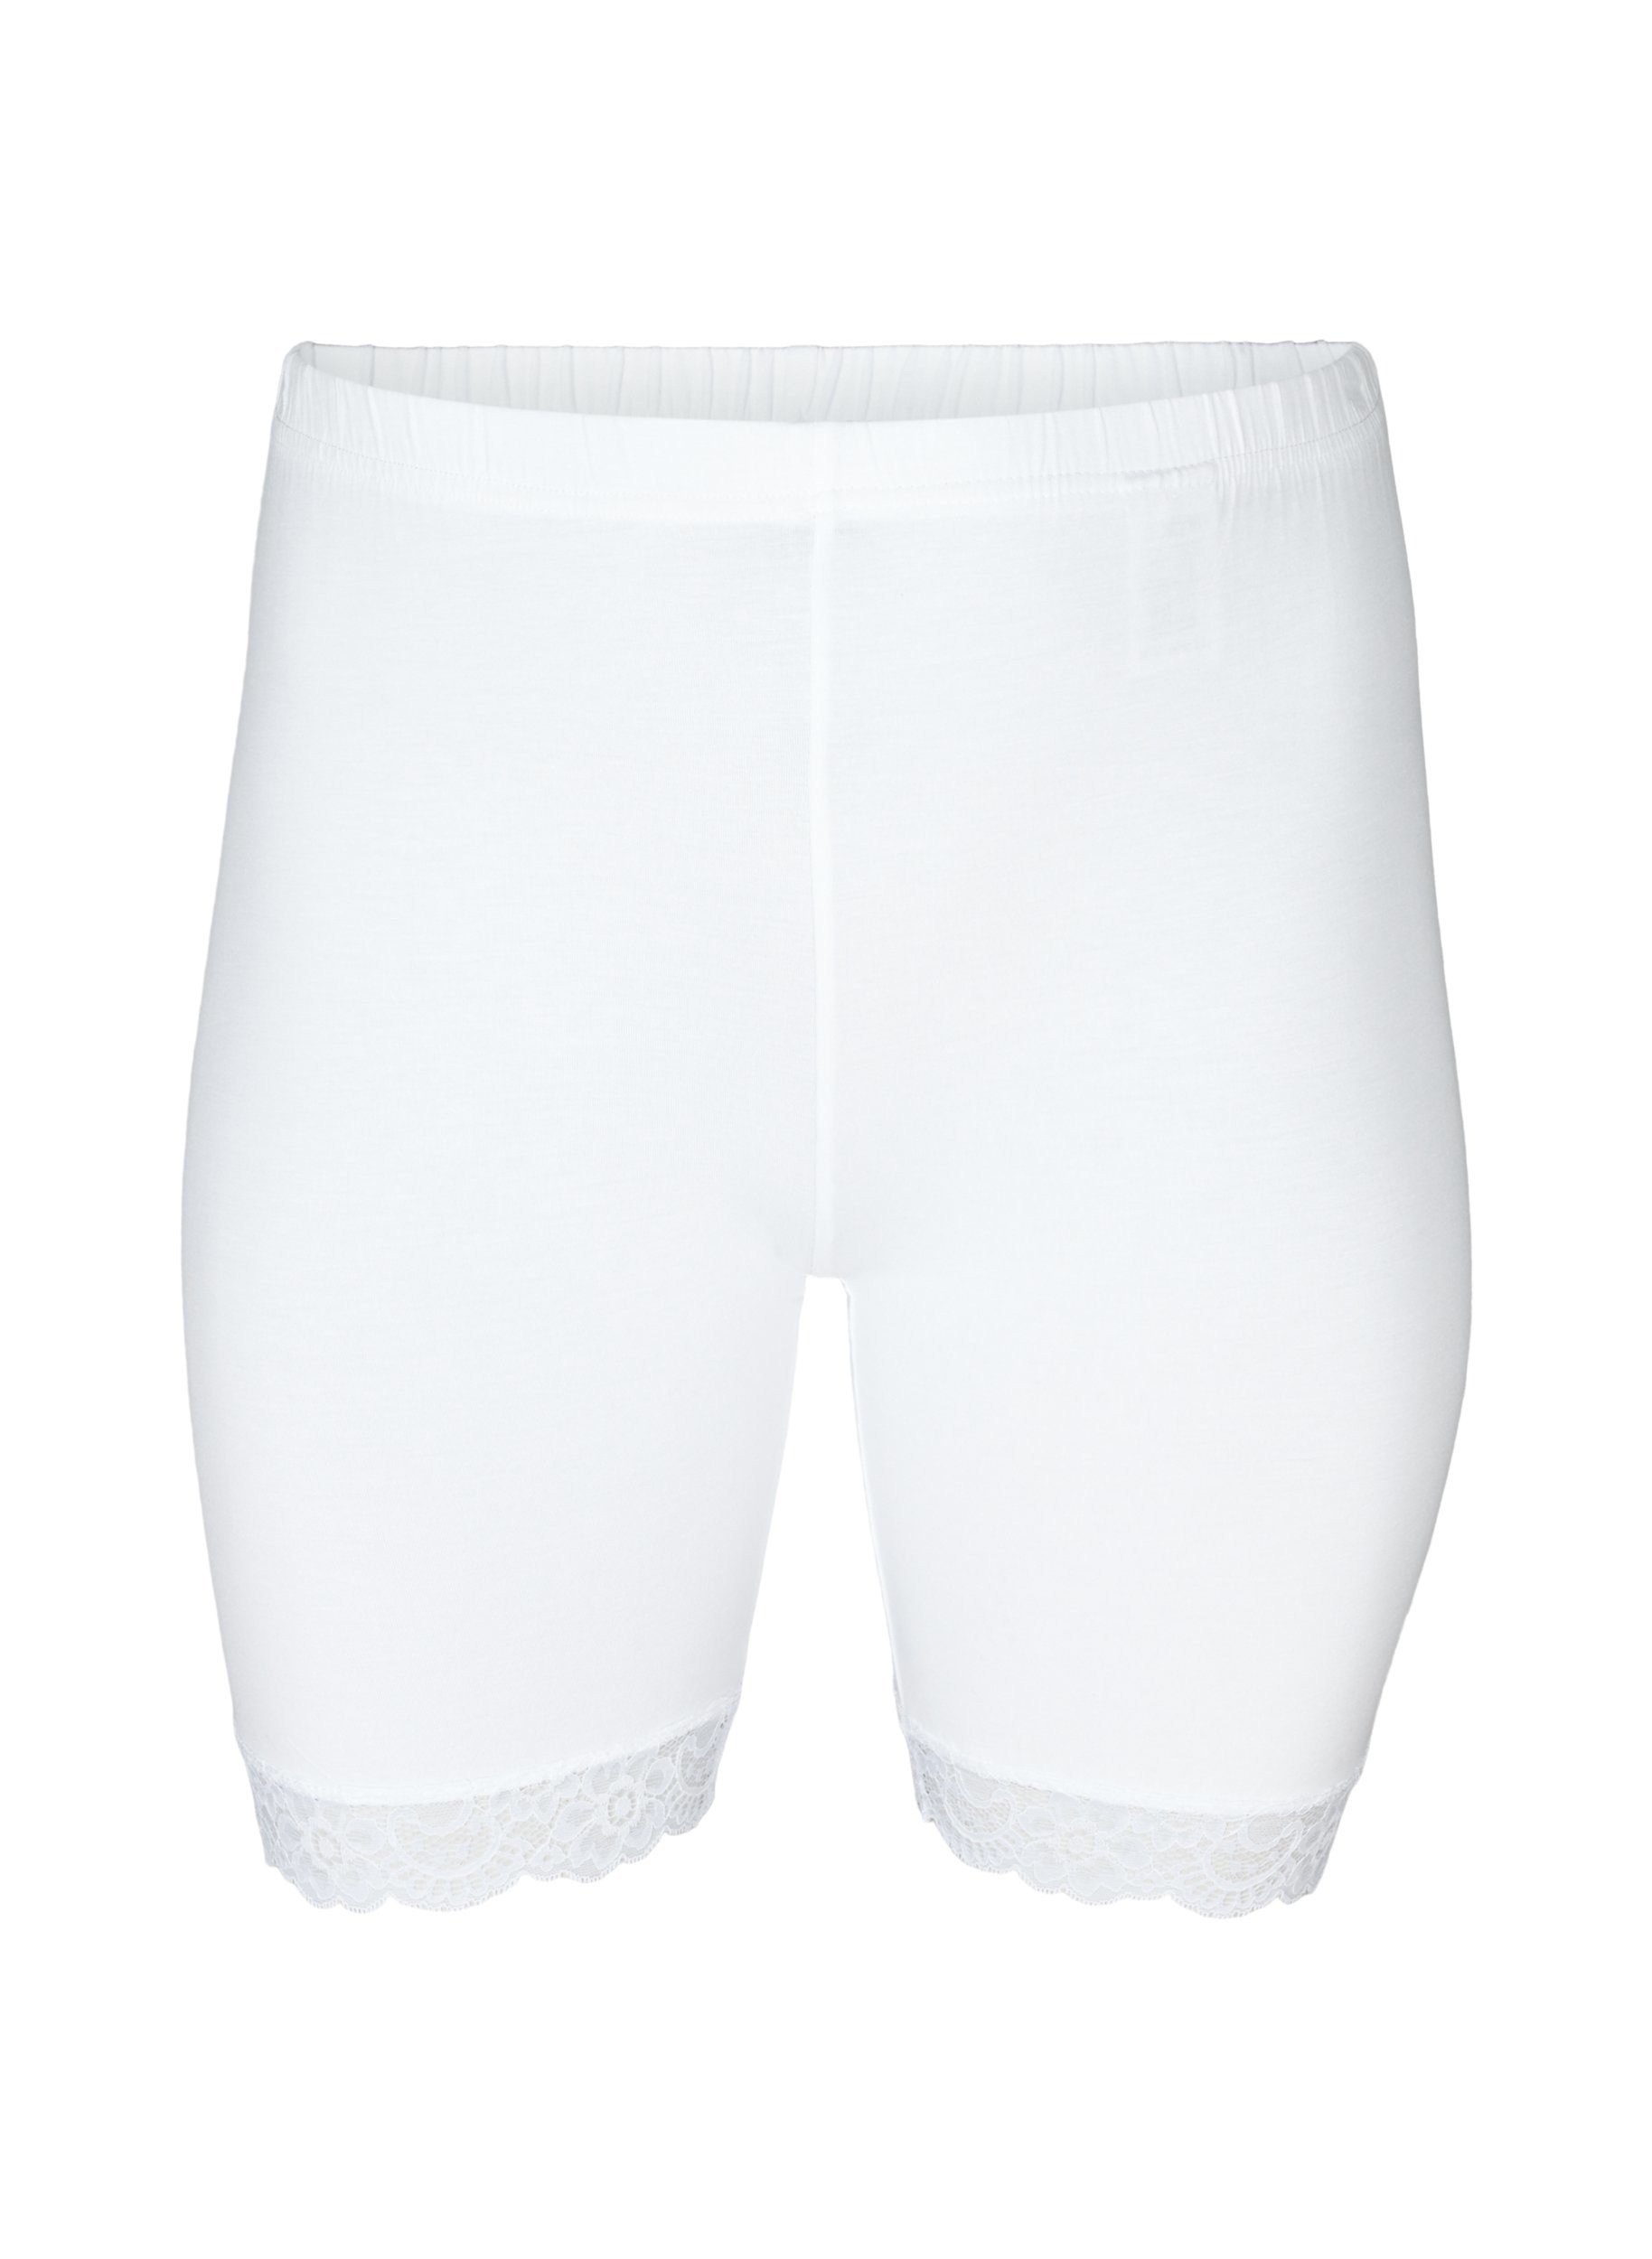 Cycling shorts with a lace trim, Bright White